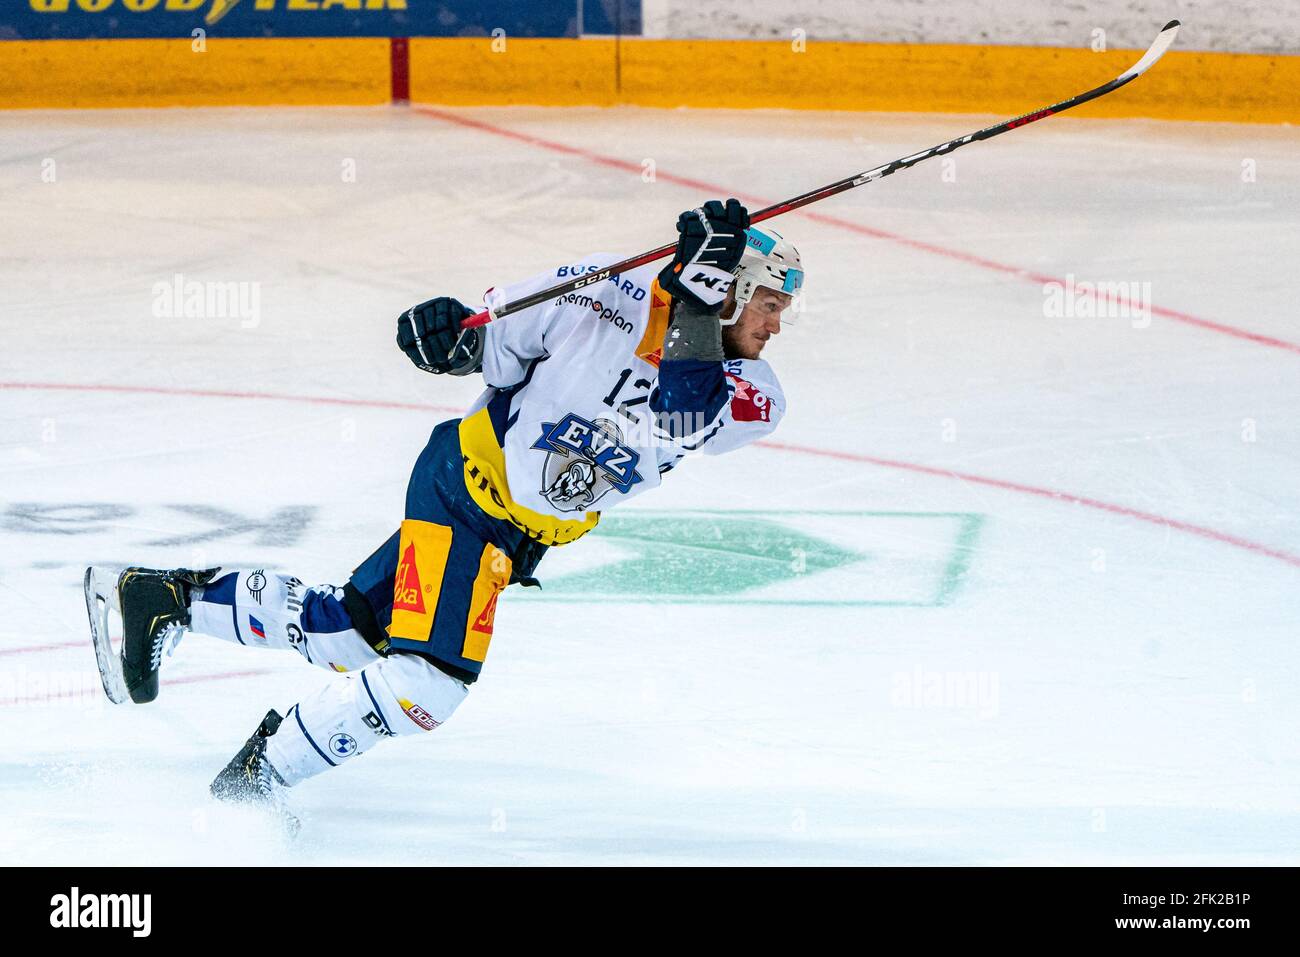 Rapperswil, April 27, 2021, Yannick Zehnder # 12 (EV Zug) shoots from all  positions during the National League Playoff semi-final ice hockey game 2  between SC Rapperswil-Jona Lakers and EV Zug on